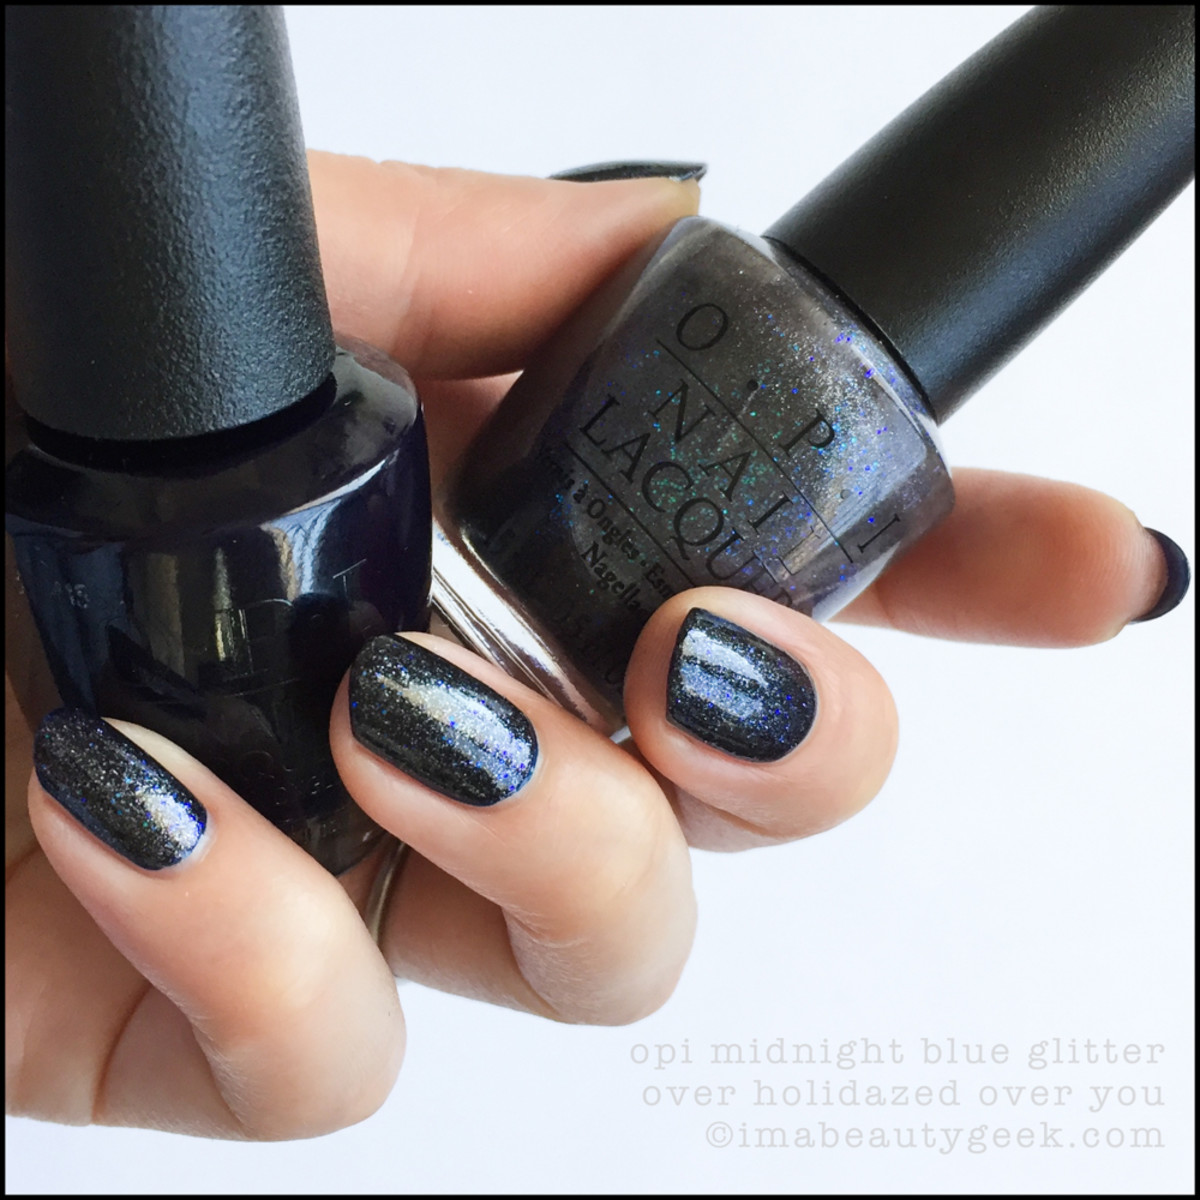 OPI Midnight Blue Glitter over Holidazed Over You 2 - Love OPI XOXO Holiday 2017 Collection